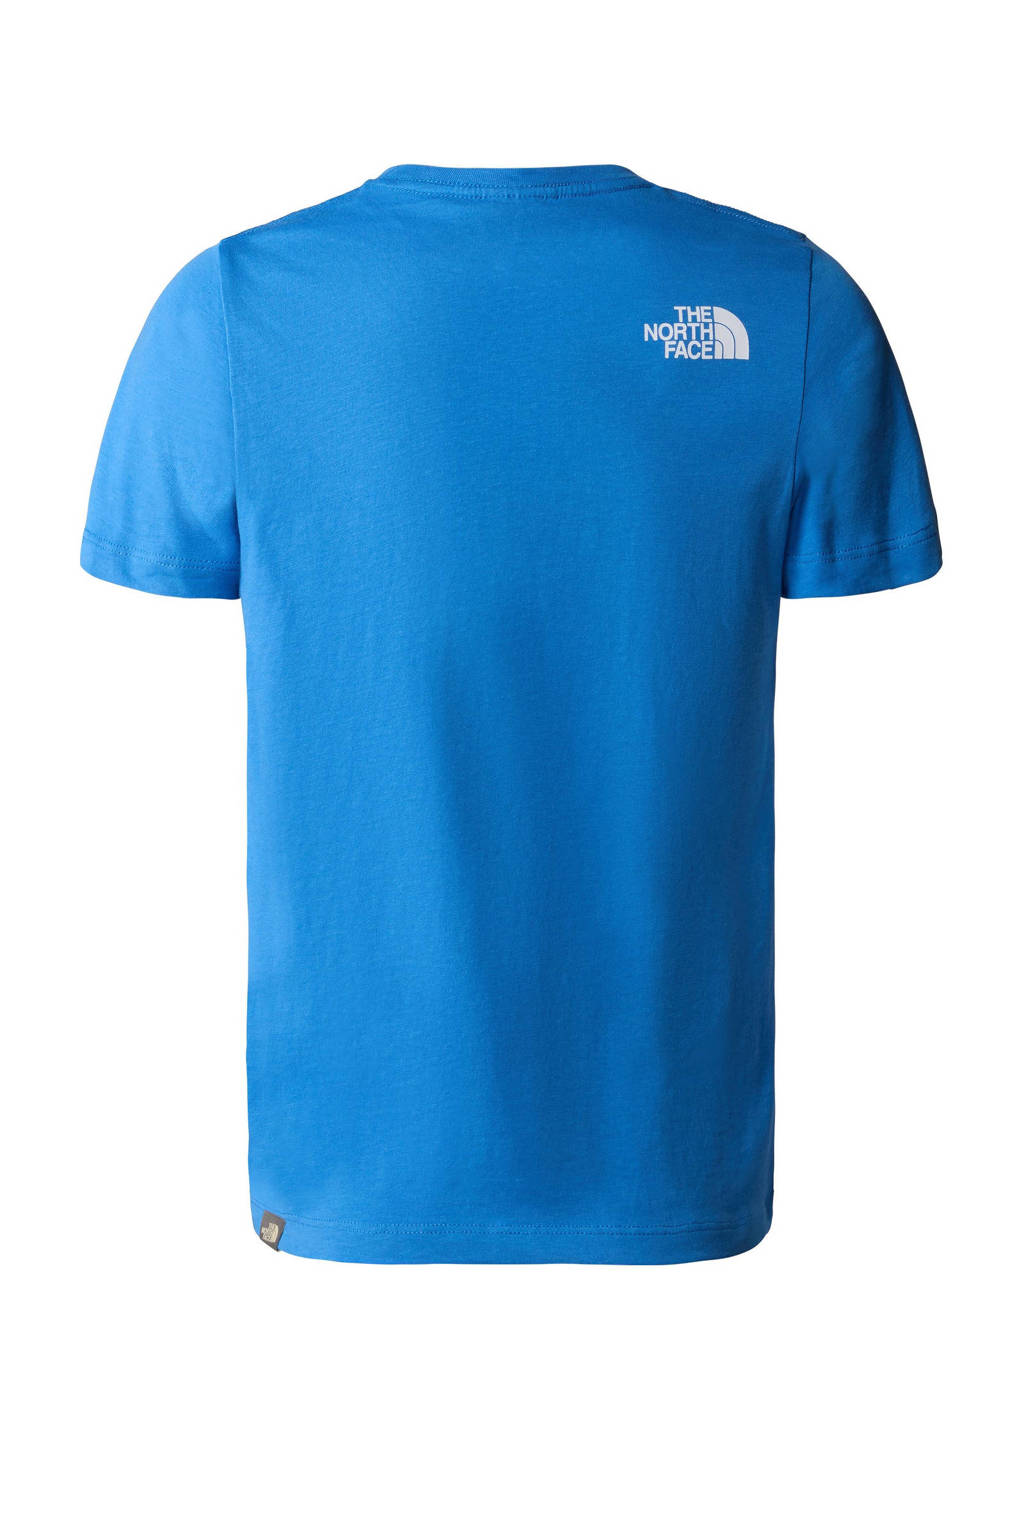 Billy Goat enthousiast eetpatroon The North Face T-shirt met logo blauw/wit | wehkamp